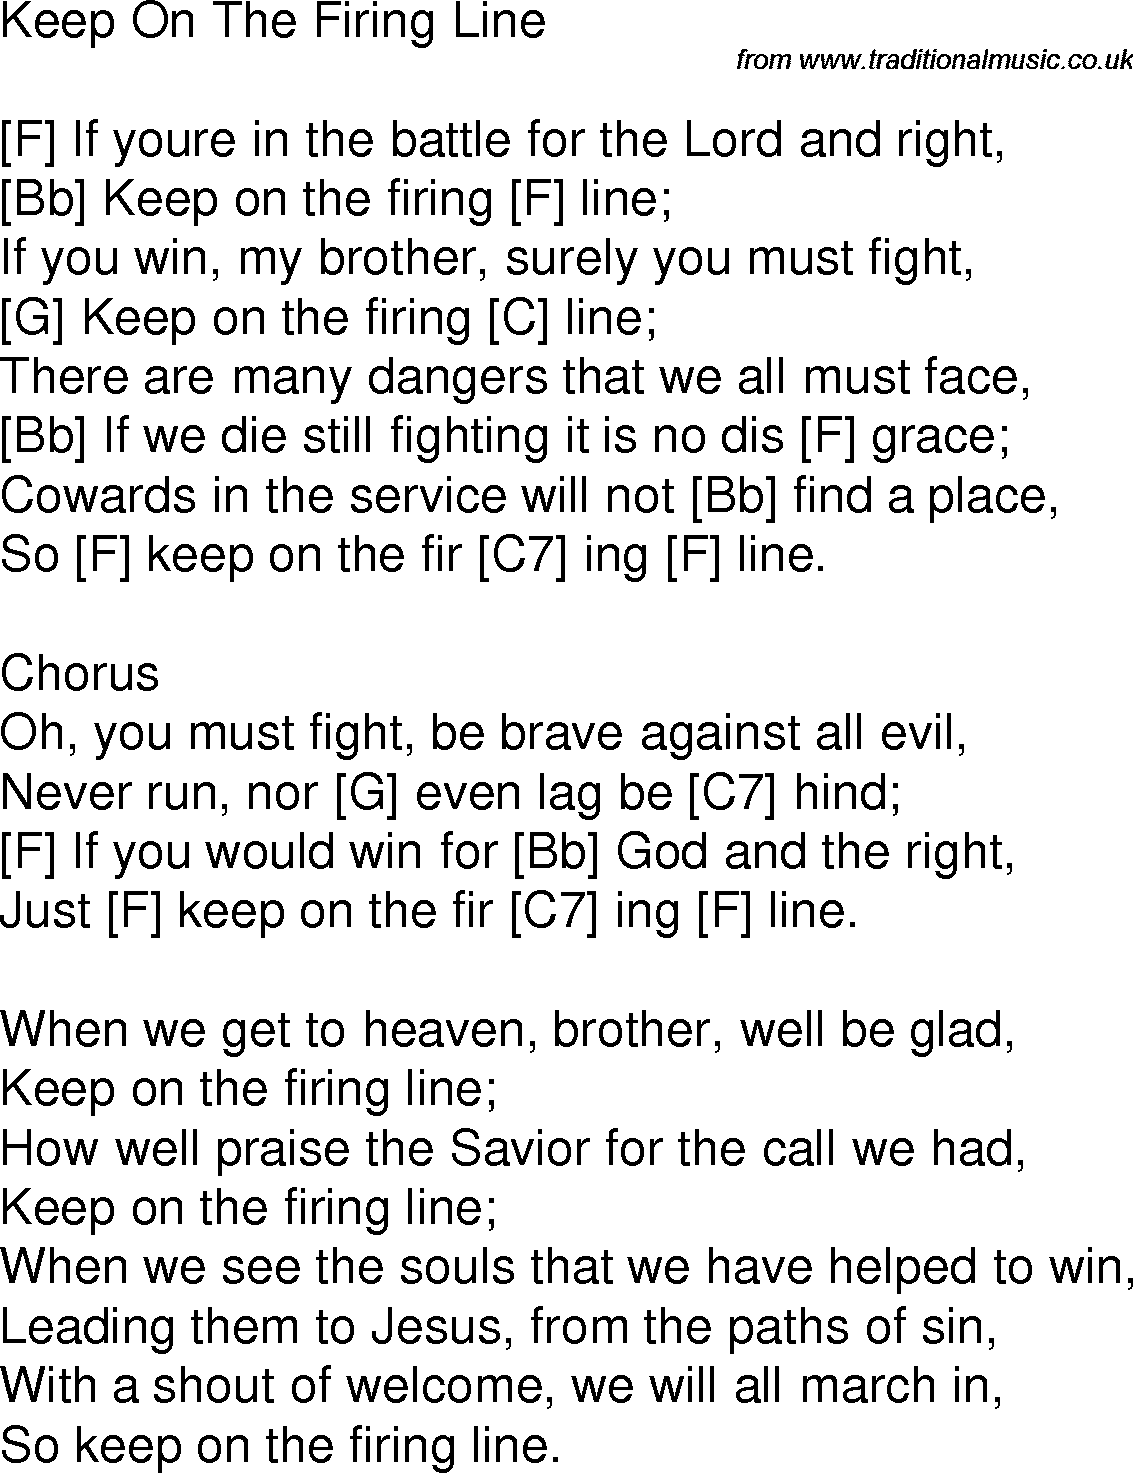 Old time song lyrics with chords for Keep On The Firing Line F